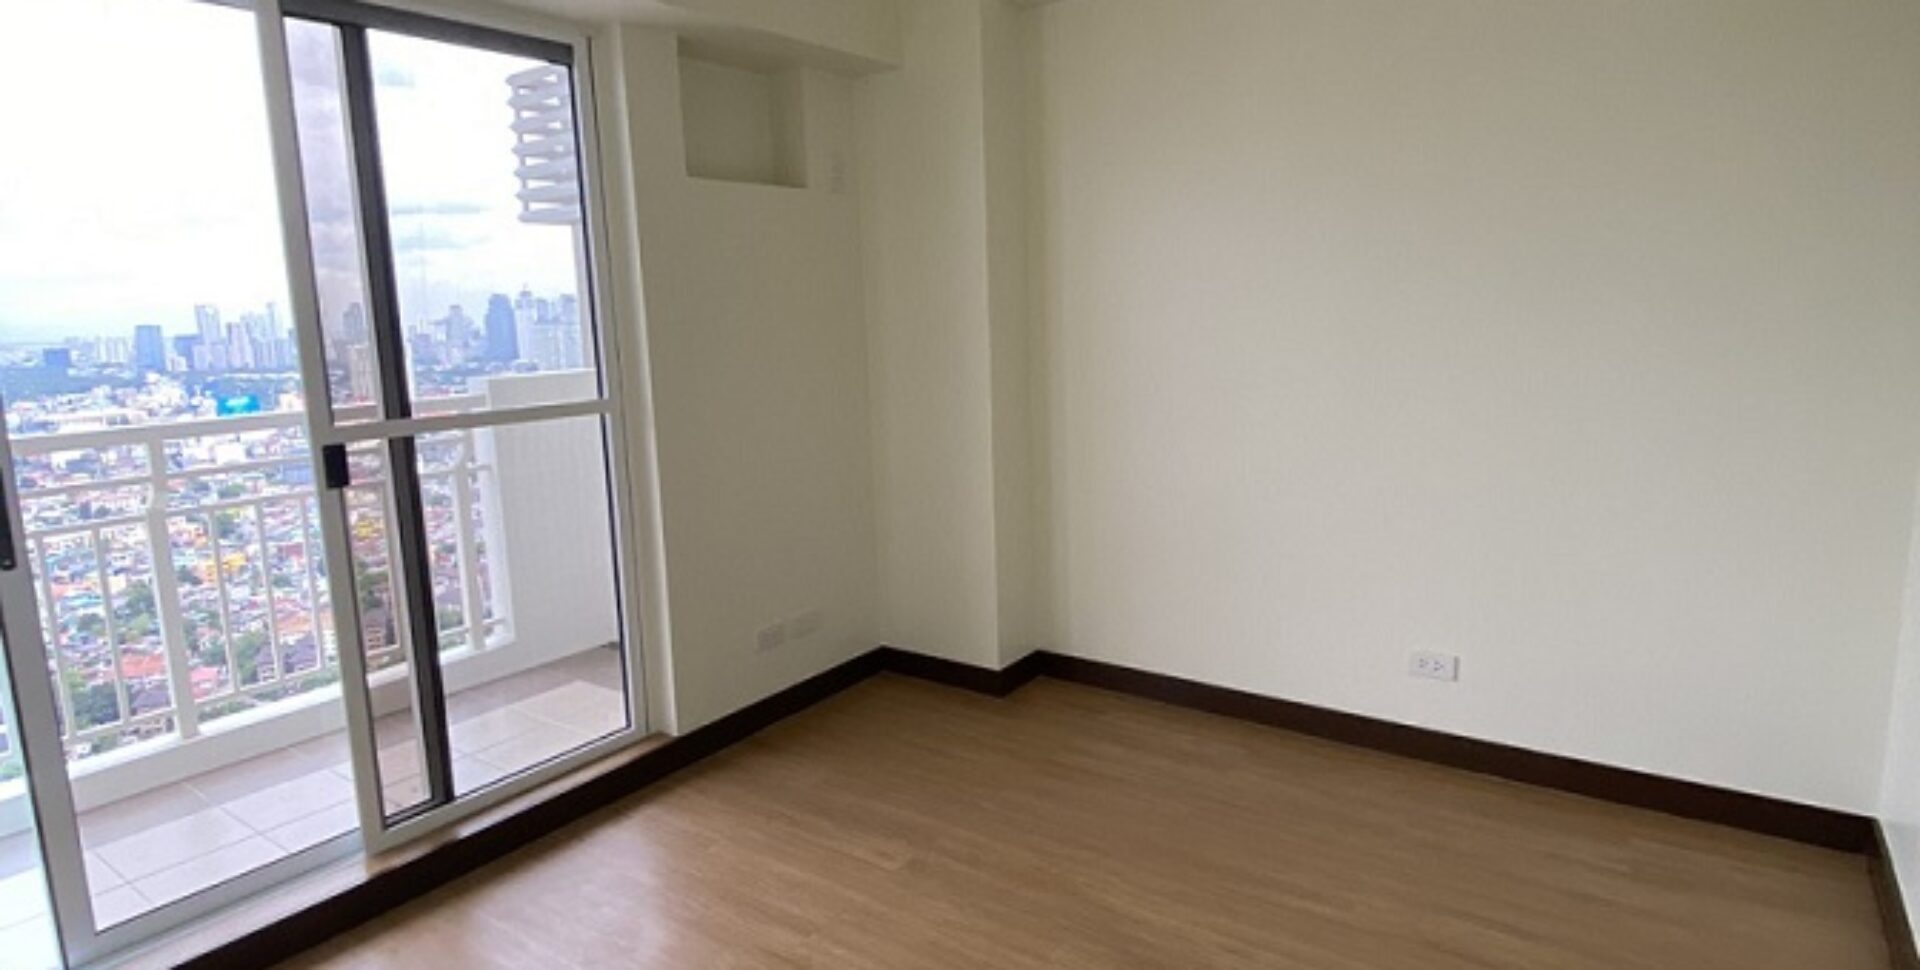 2 Bedroom Condo in Brixton Place by DMCI, Kapitolyo, Pasig 10 Mins. to BGC!!